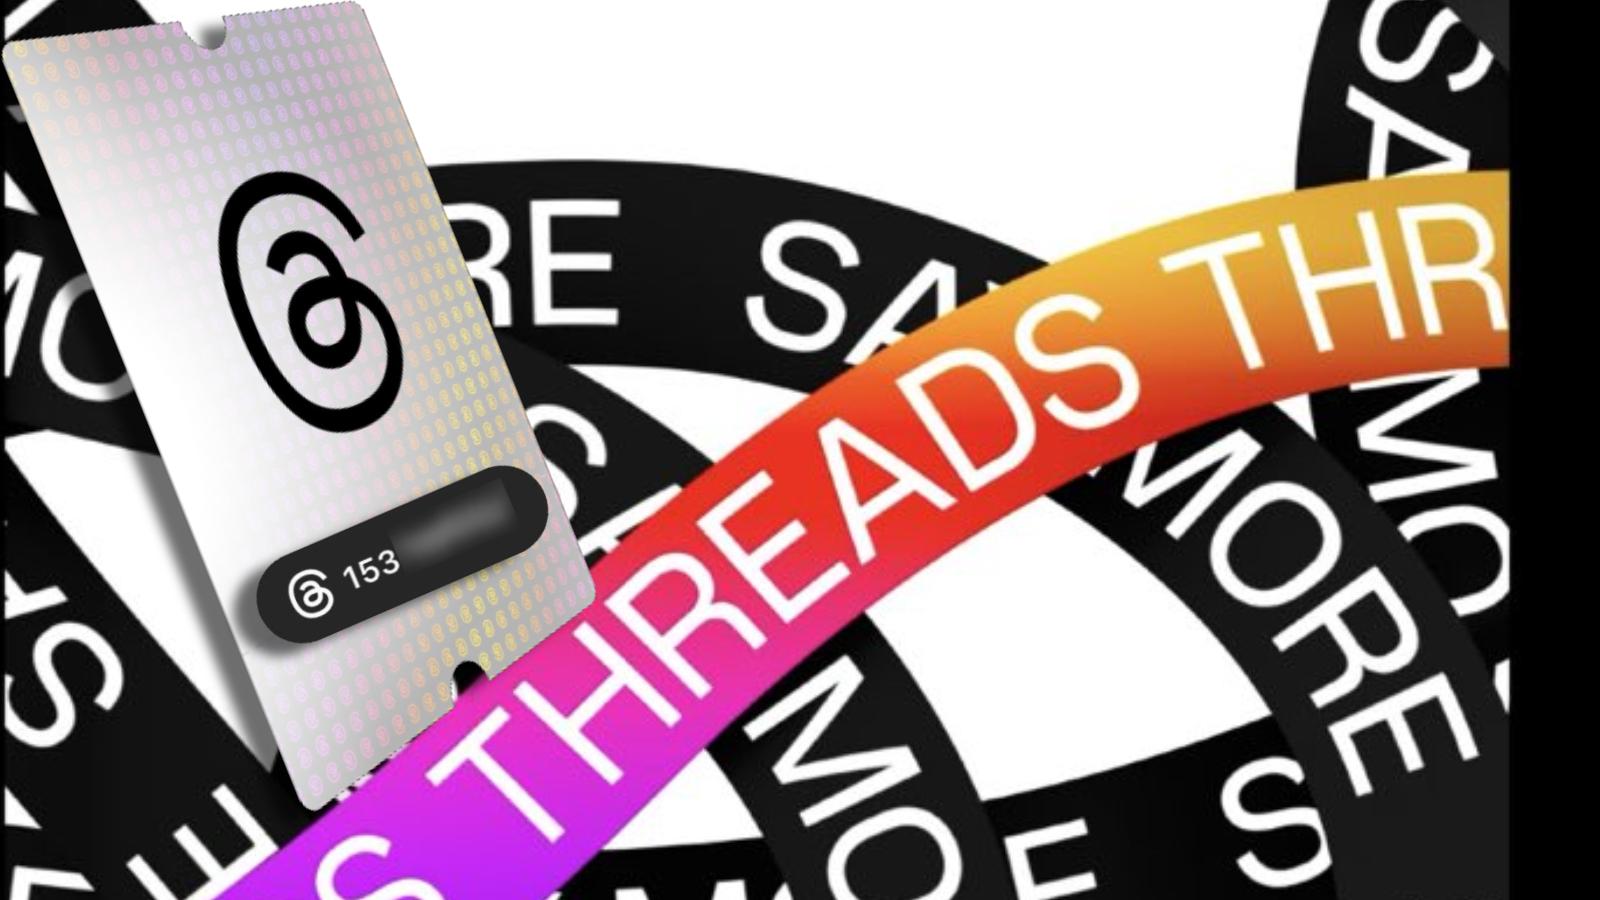 Threads promo image with ticket and 15 million user number